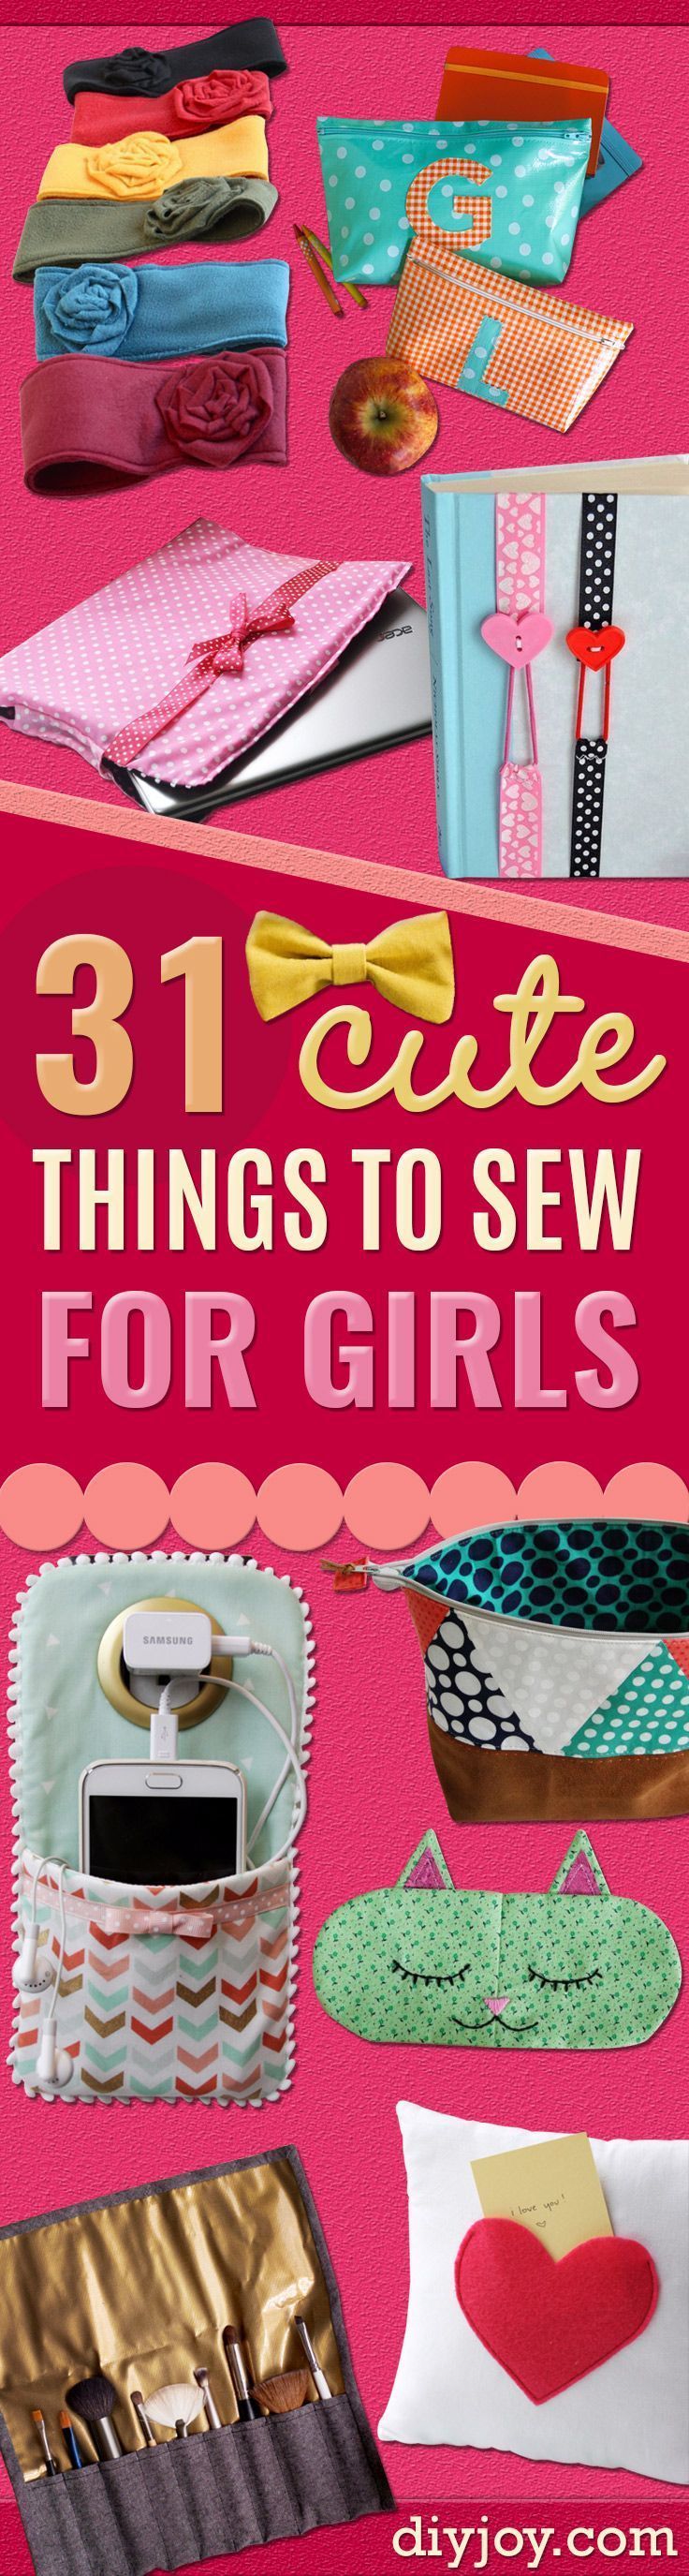 Best Sewing Projects to Make For Girls – Creative Sewing Tutorials for Baby Kids and Teens – Free Patterns and Step by Step